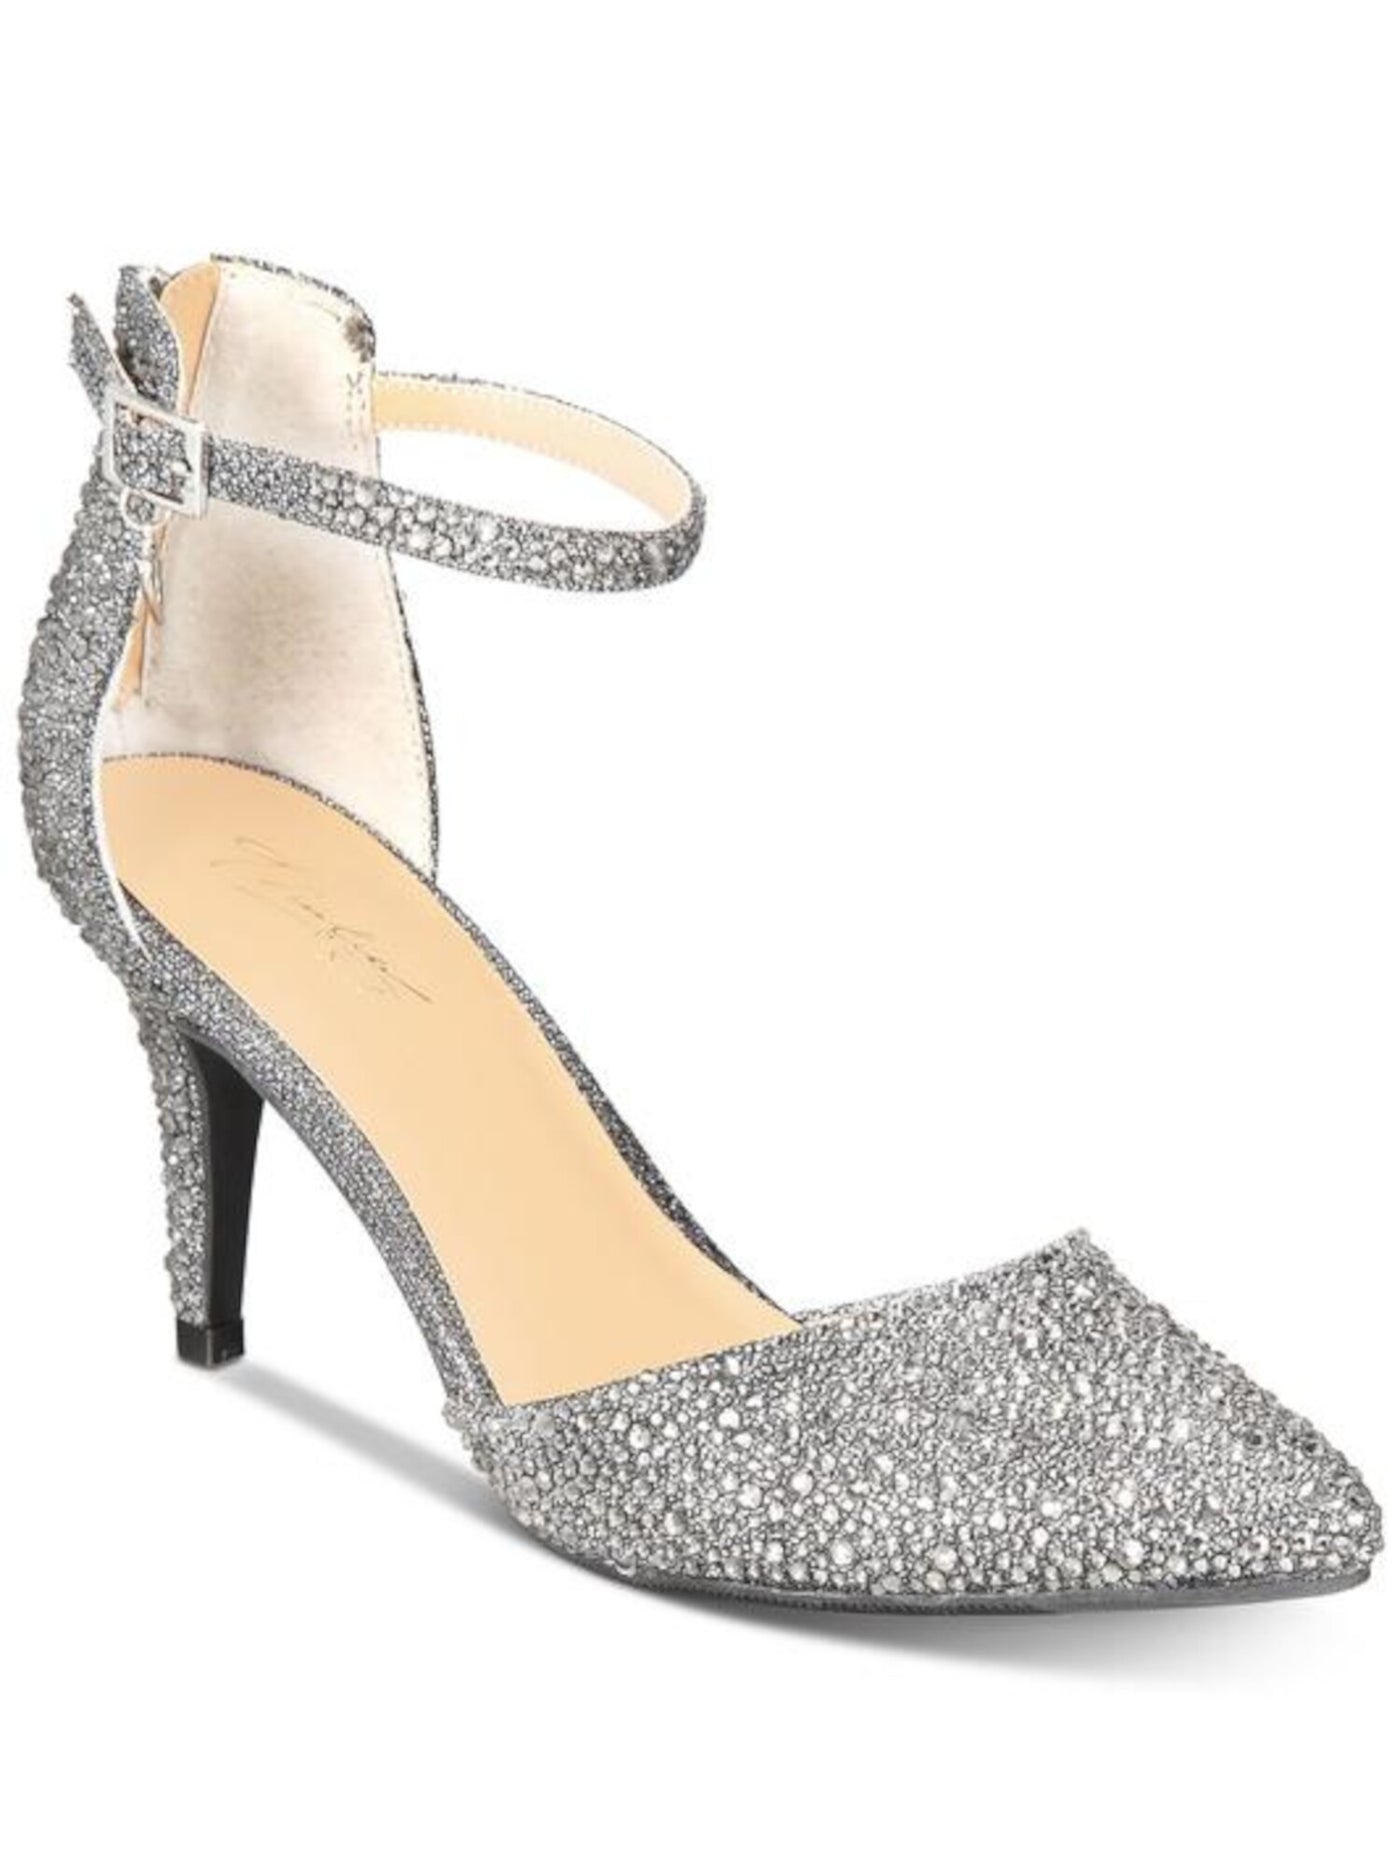 THALIA SODI Womens Gray Buckle Accent Charm Padded D'orsay Ankle Strap Glitter Vanesssa Pointed Toe Stiletto Zip-Up Dress Pumps Shoes 6.5 M